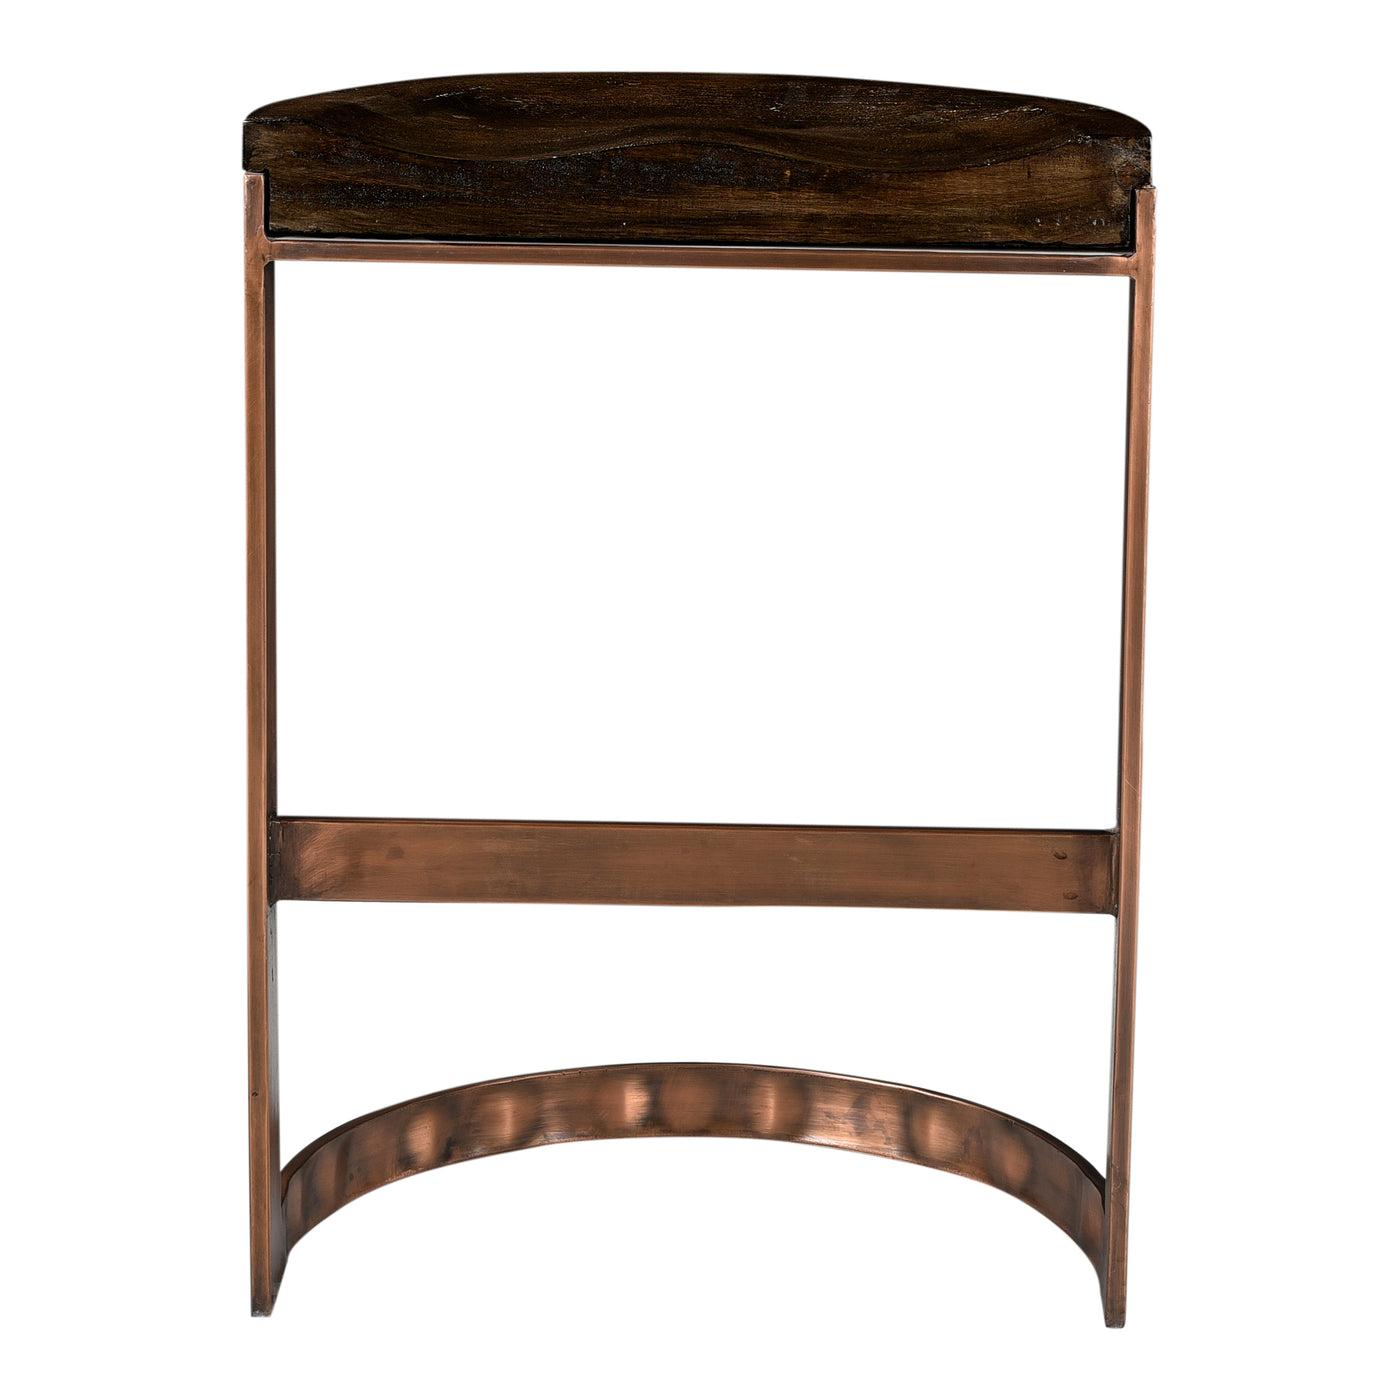 With glam copper detailing, the Bancroft Counter Stool gives a modern edge to the rustic wooden seat. A strong iron base g...